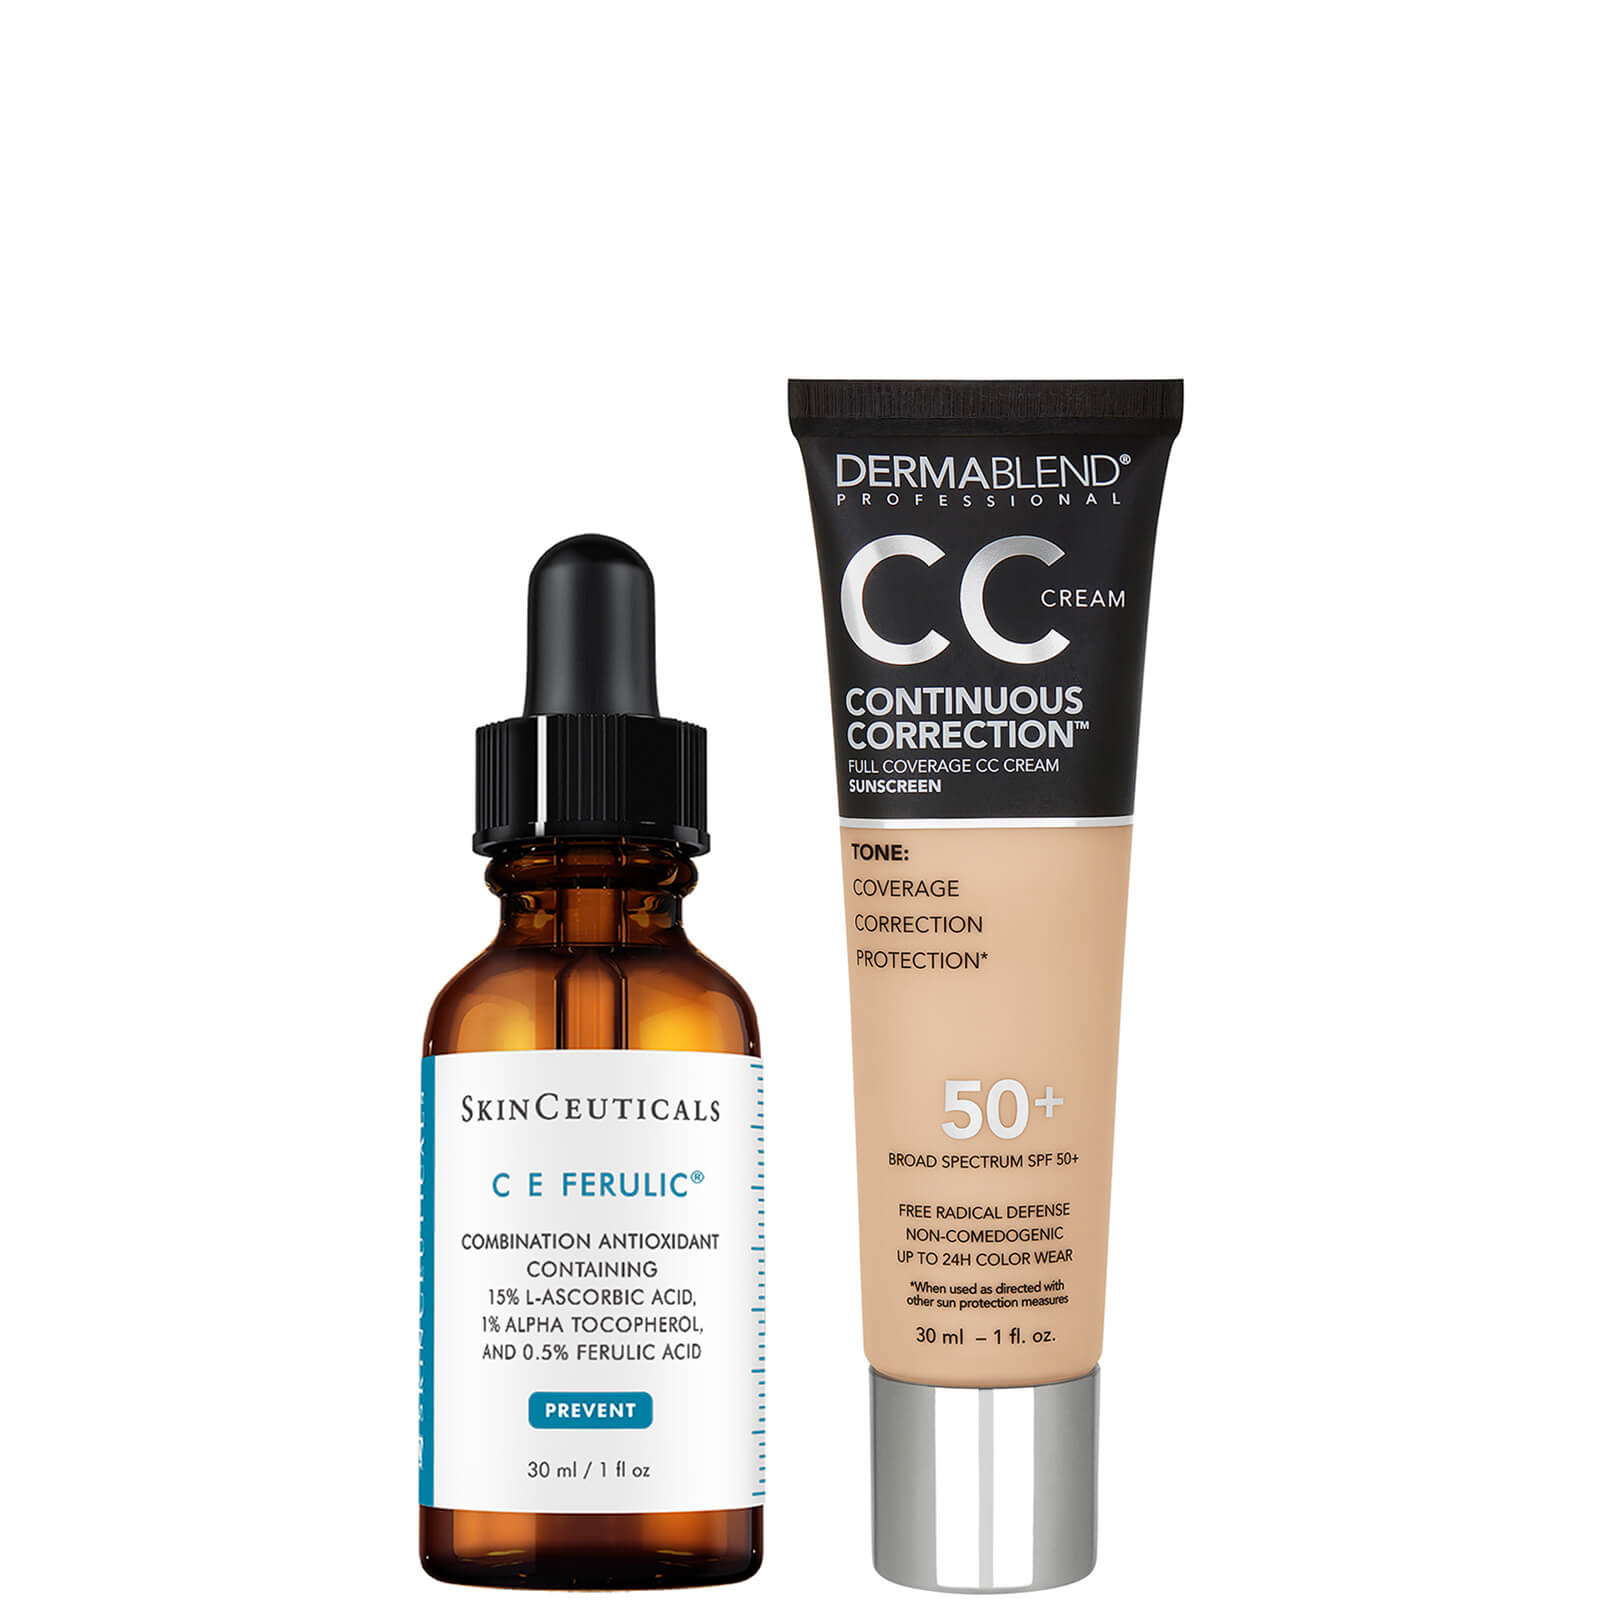 SkinCeuticals and Dermablend Anti-Aging Brightening Duo with Vitamin C and Niacinamide (Various Shades) ($223 Value) - 30N Light 2